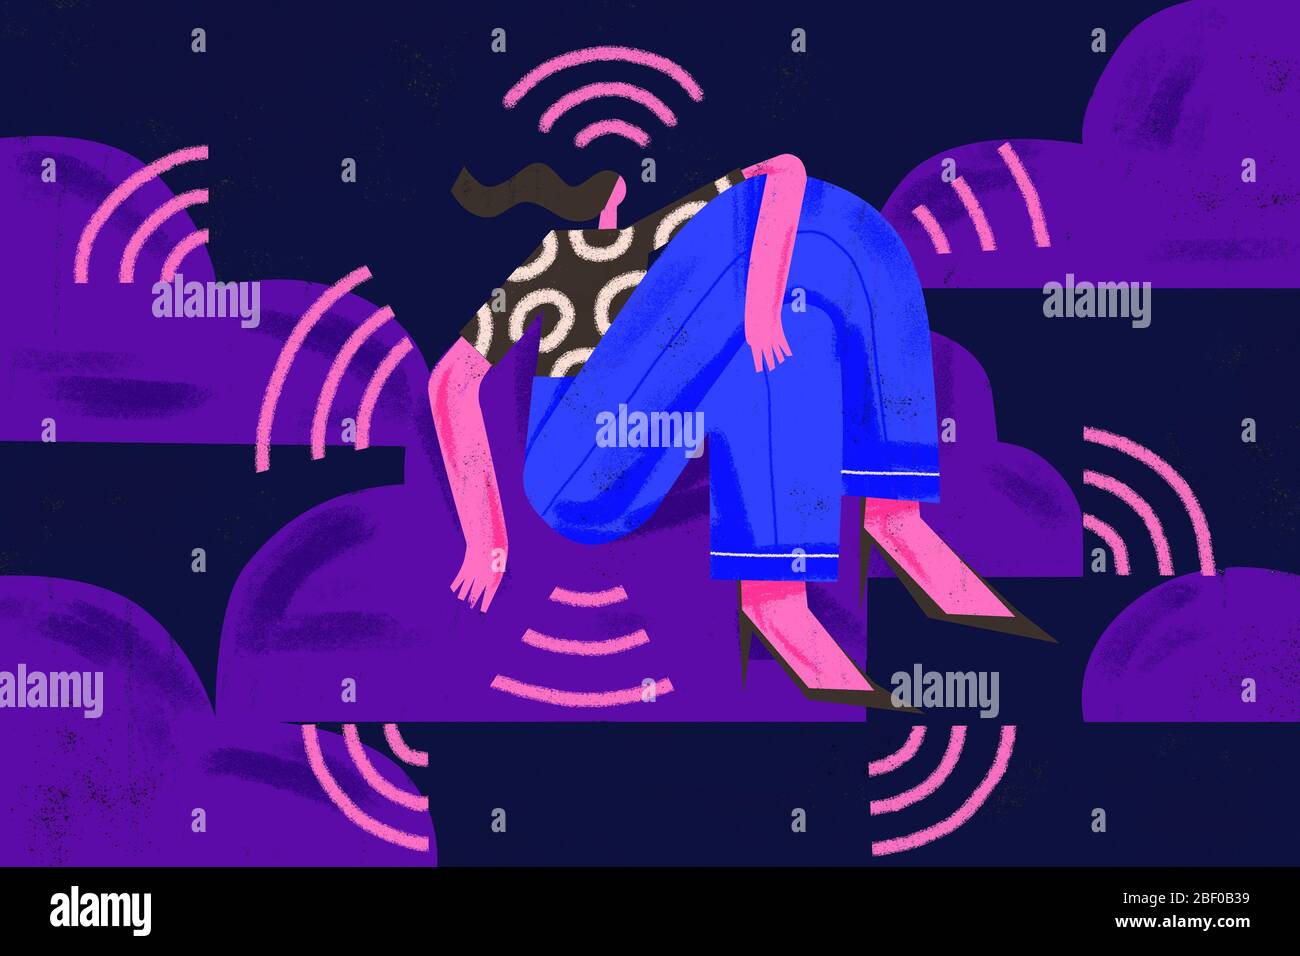 Stay connected concept. Social media and telecommunication technologies illustration. Young woman stays in the clouds surrounded by Wi-Fi signal symbo Stock Photo